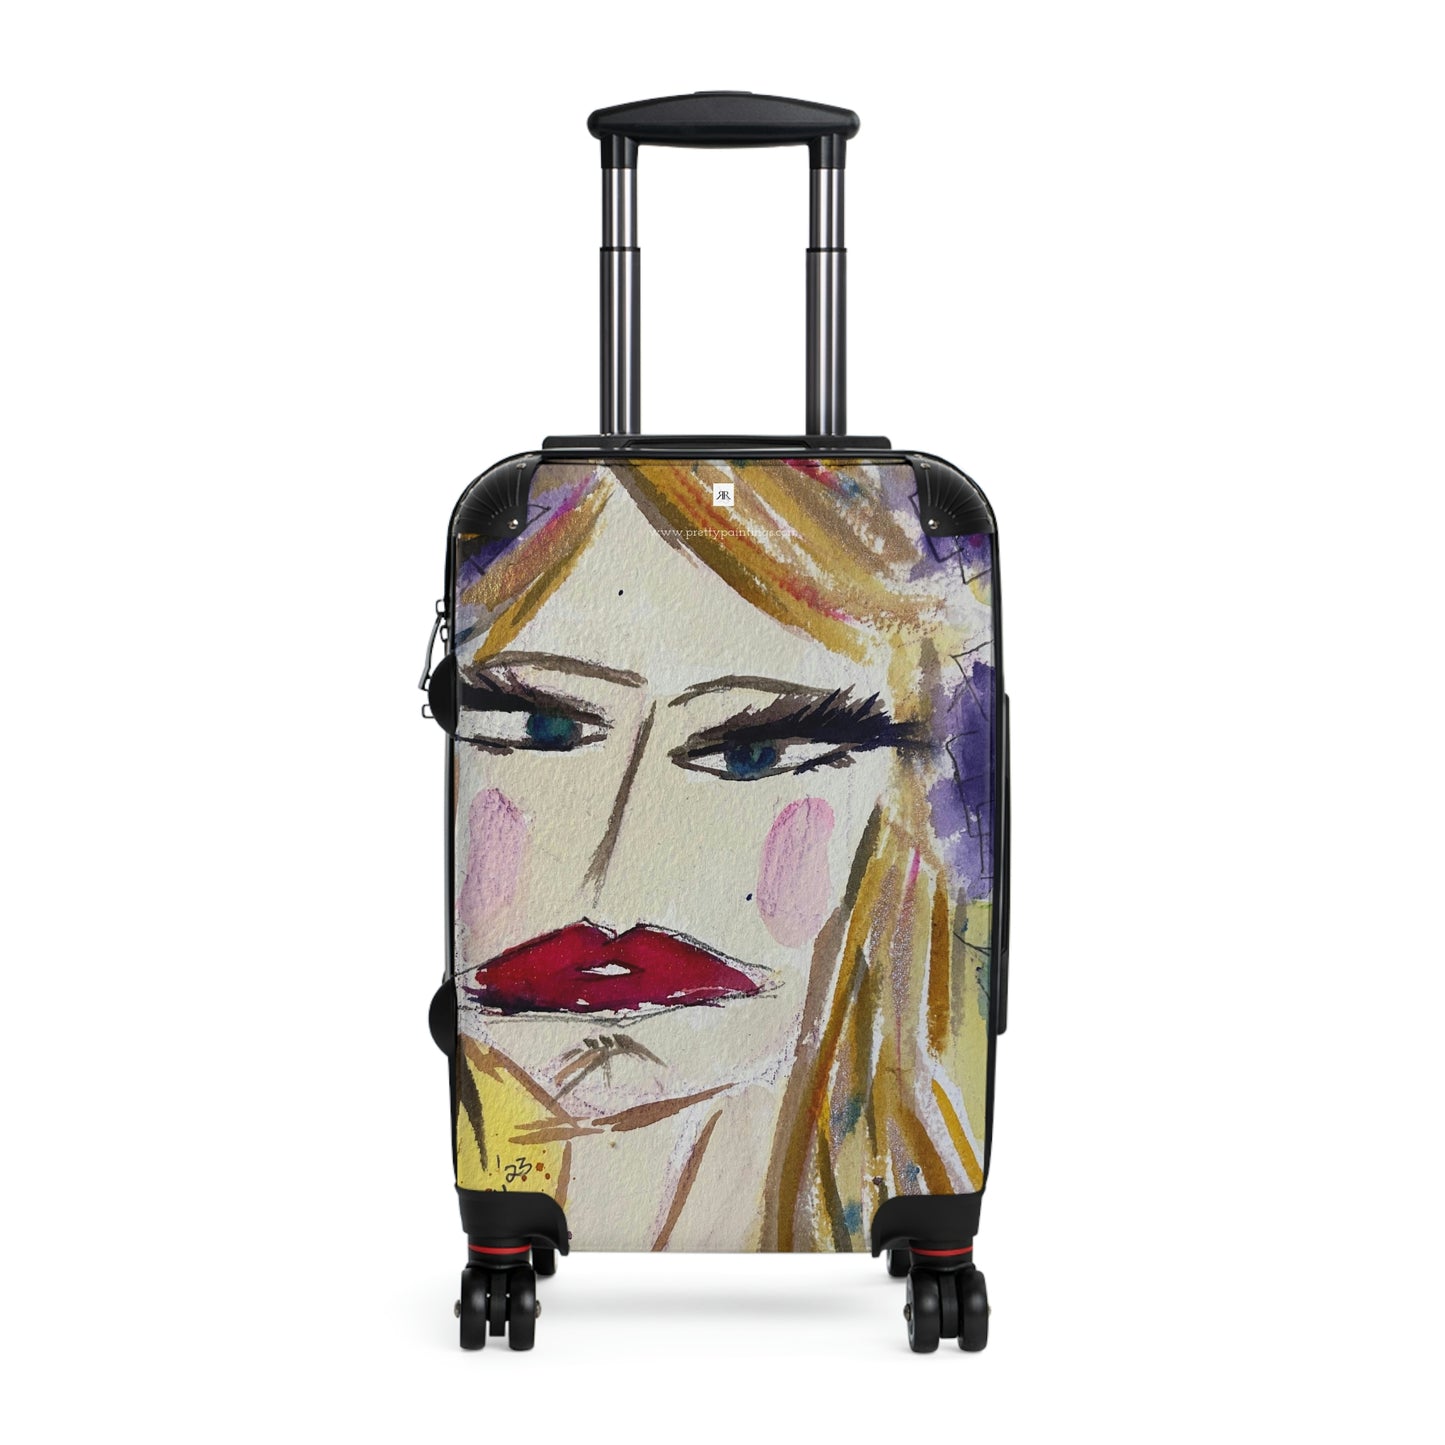 Moody Blonde "Whateverr!" Carry on Suitcase